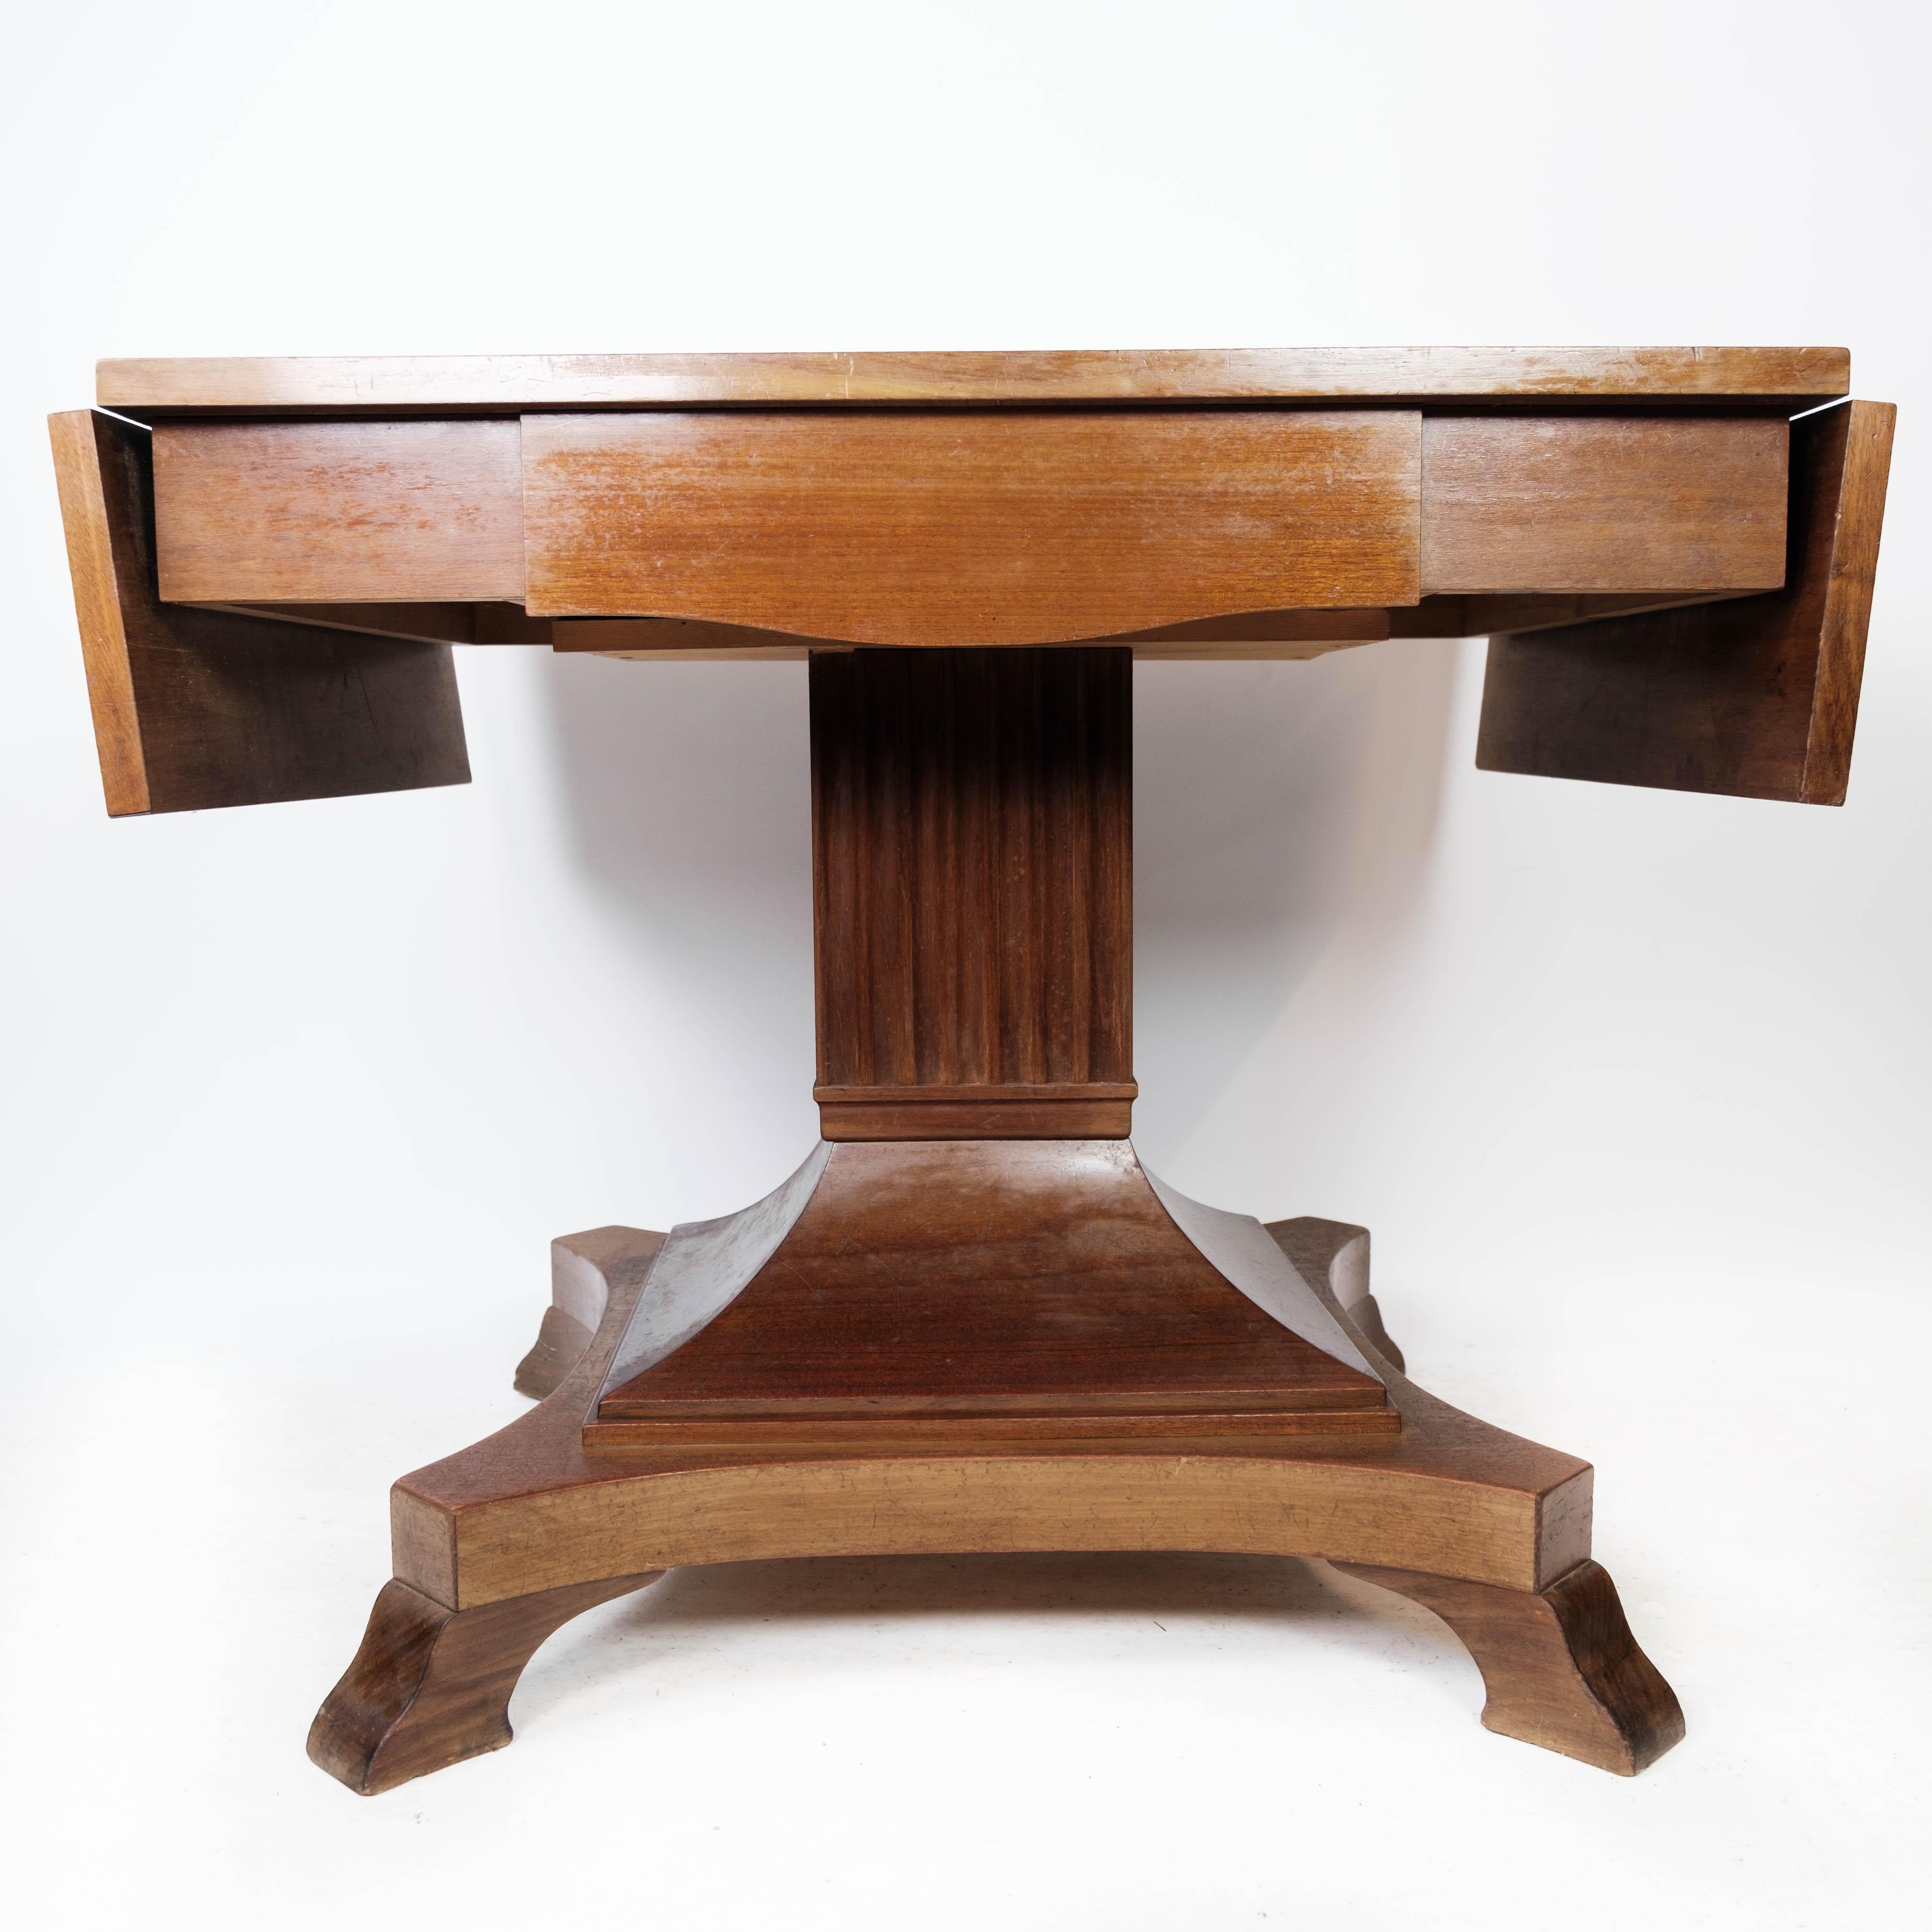 Dining table of mahogany from around the 1920s. The table is in great vintage condition. The table measures 145 cm when extended.